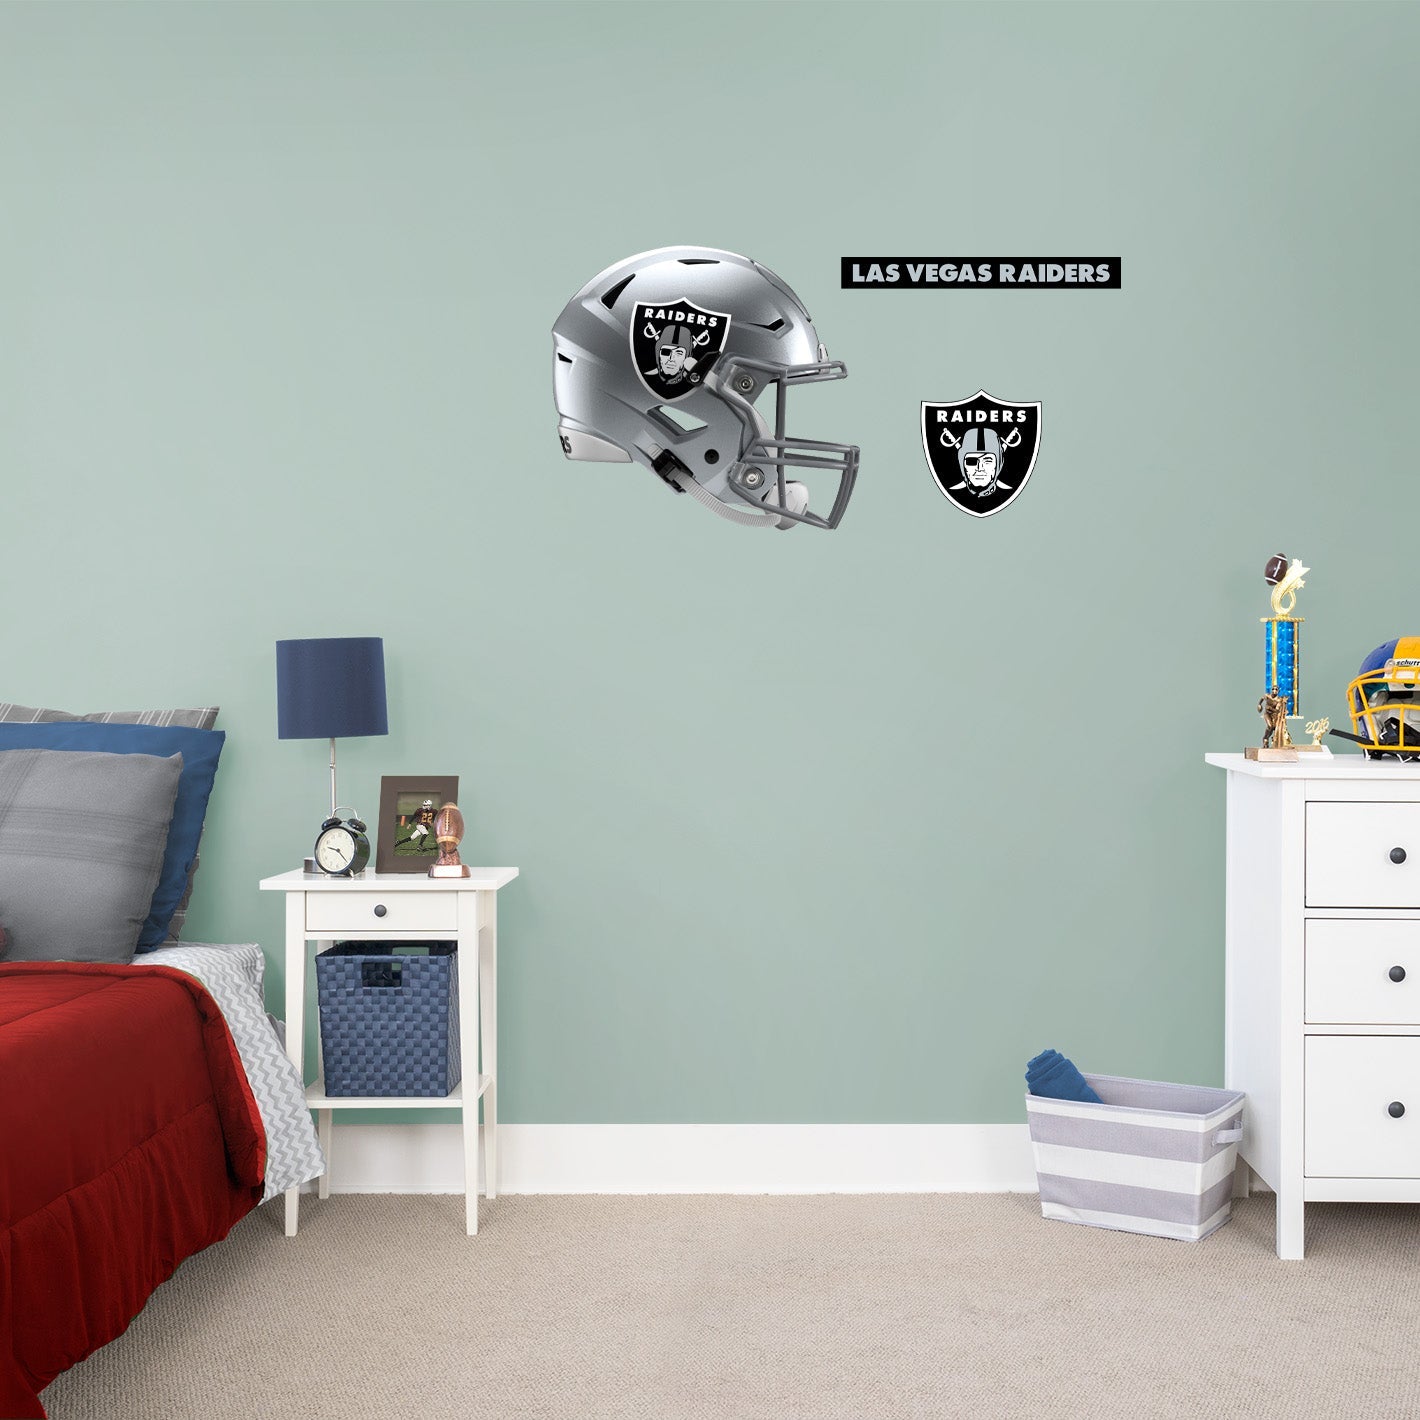 Las Vegas Raiders: Helmet - Officially Licensed NFL Removable Adhesive Decal